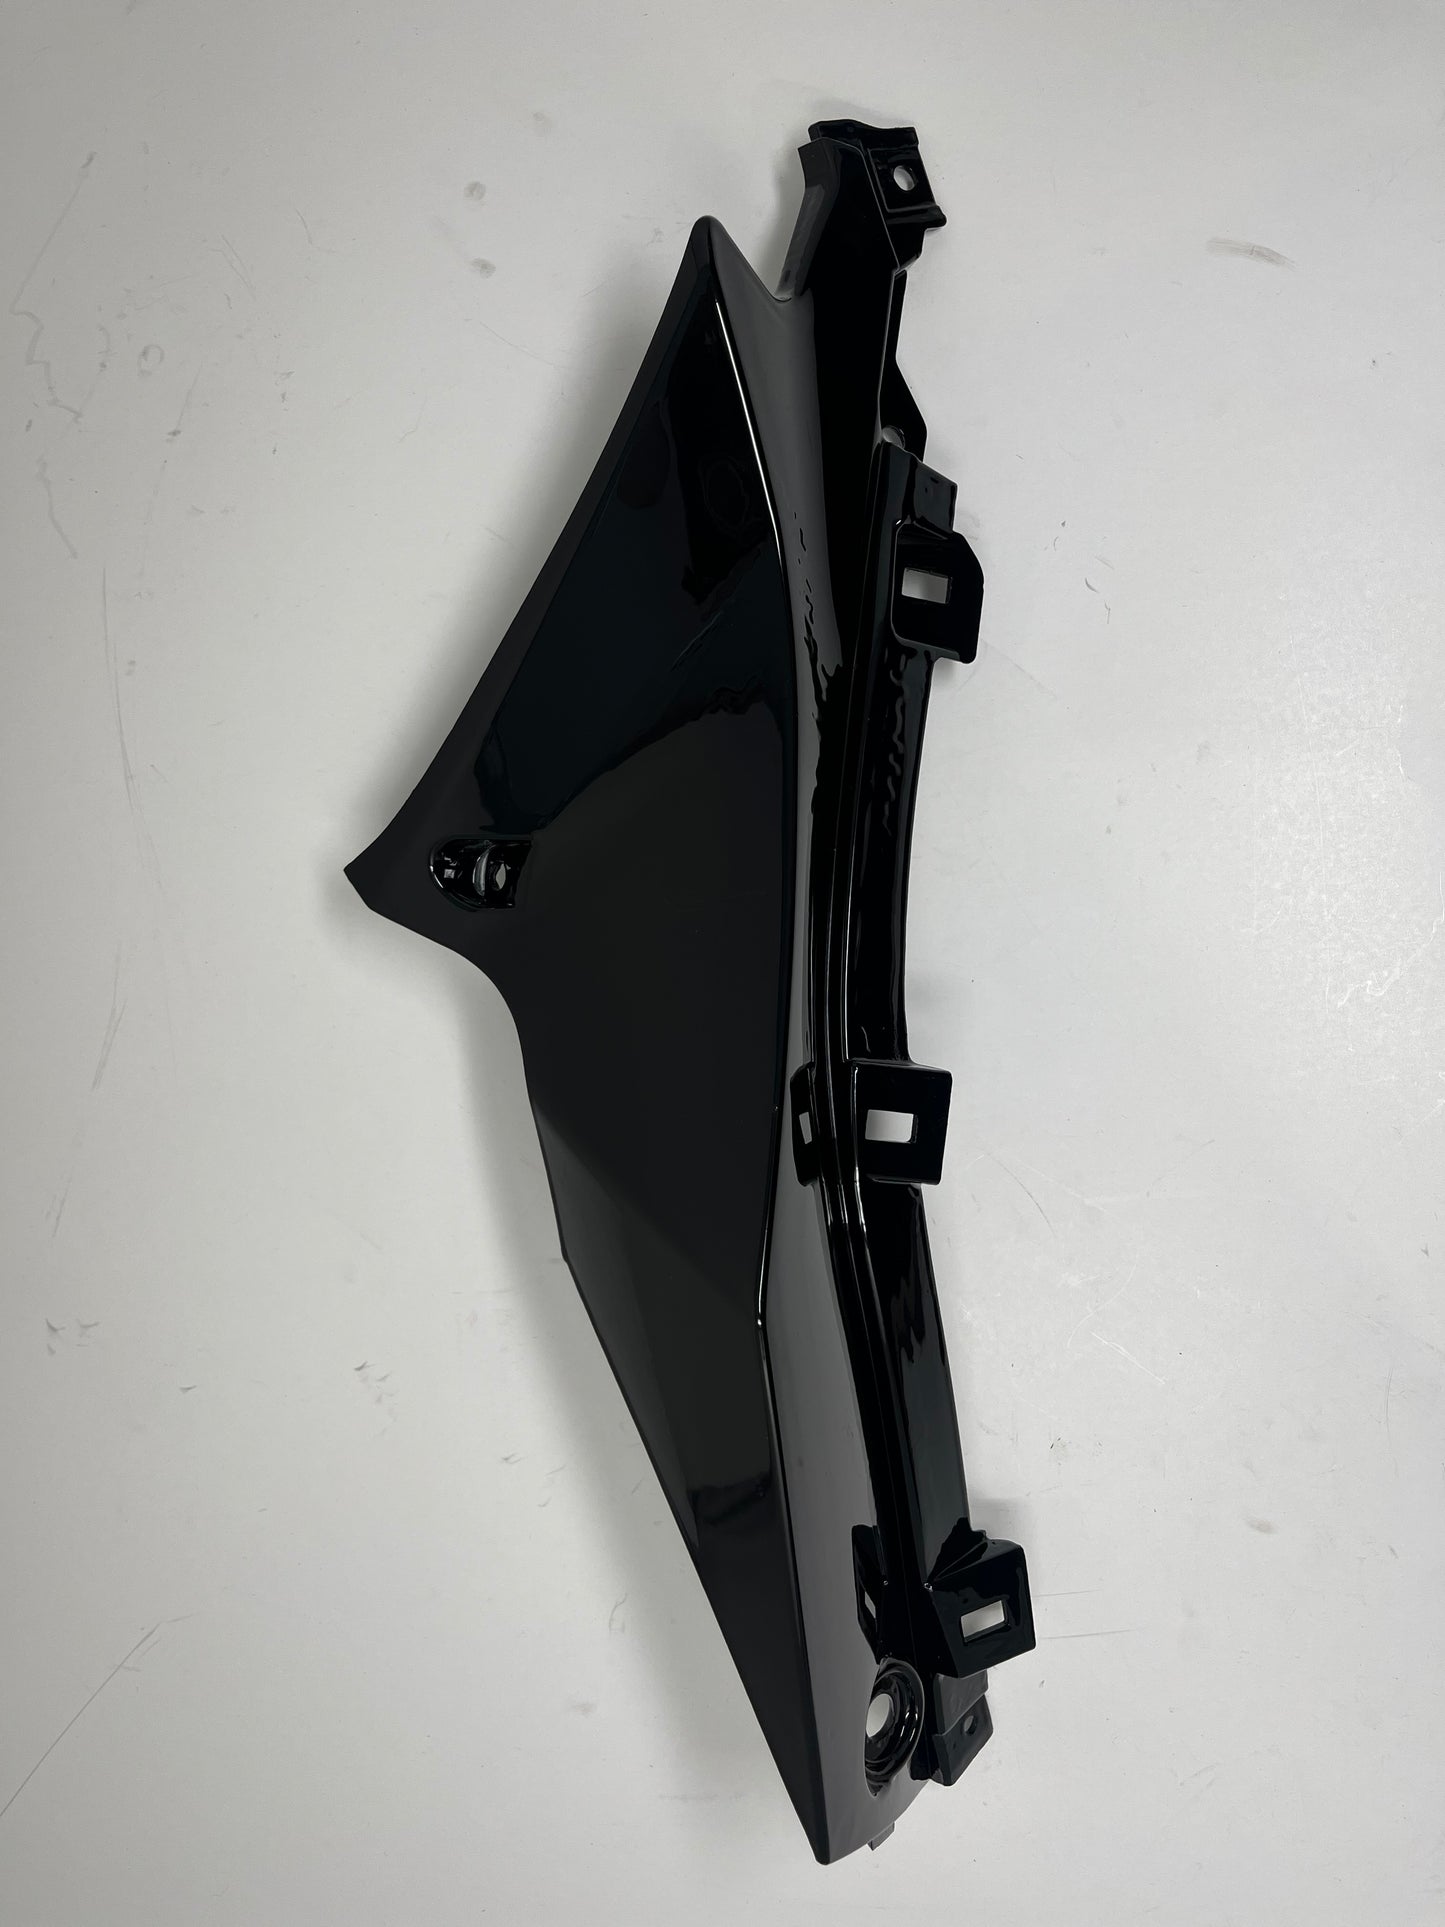 Right tank guard for DF250RTS for sale. Buy right fuel tank fairing for X22R motorcycle.